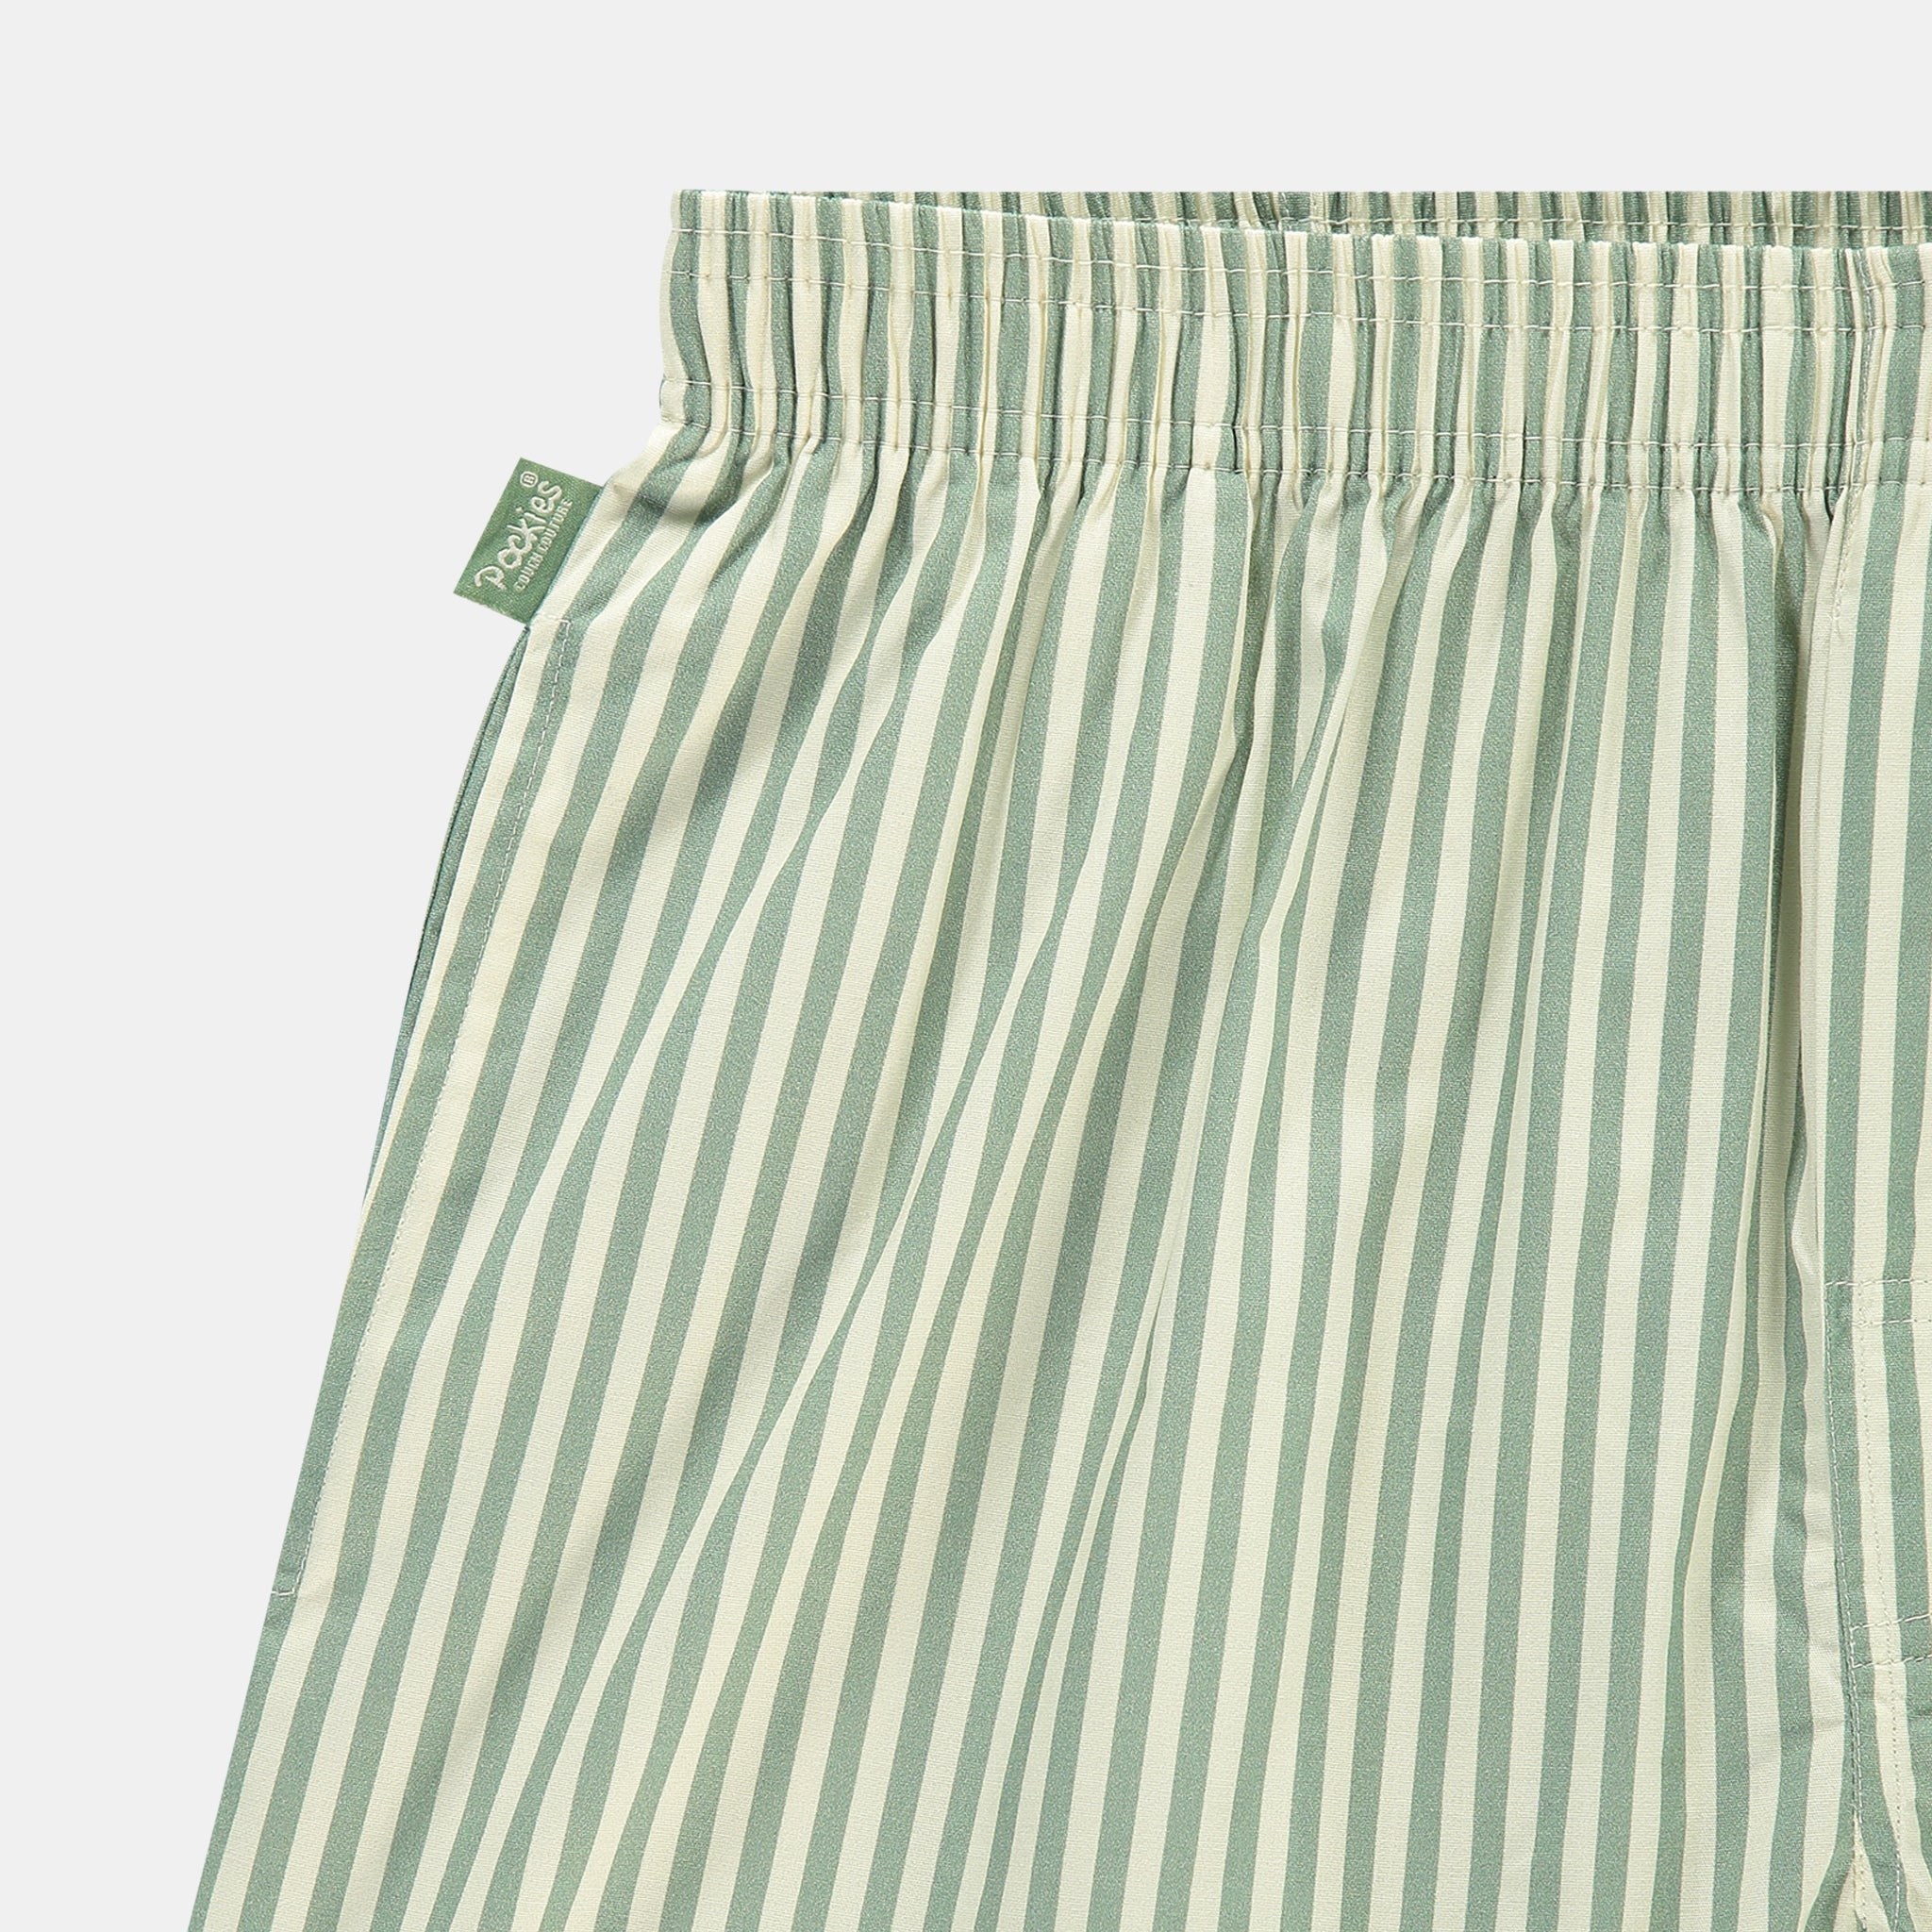 2-Pack - Striped Boxers